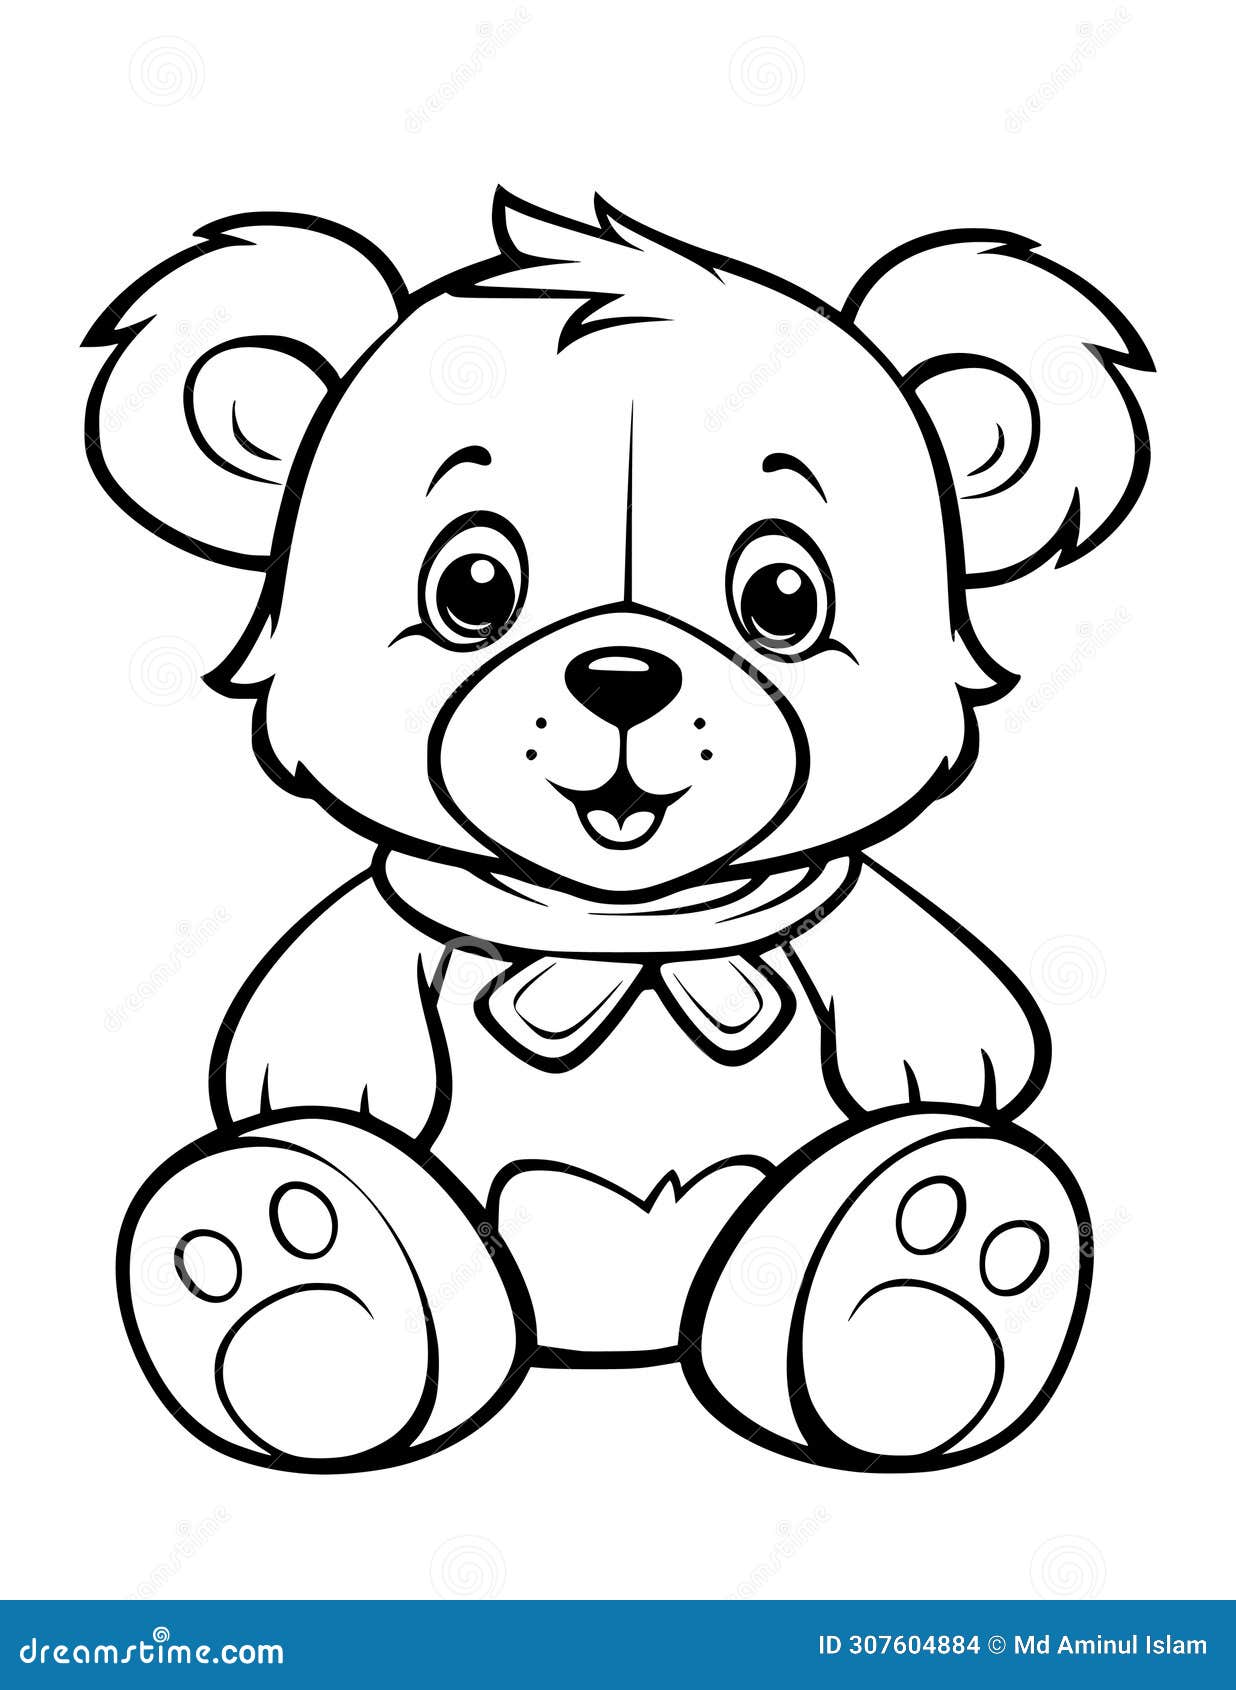 How to Draw a Teddy Bear — Directed Drawing Video for Kids | Teach Starter